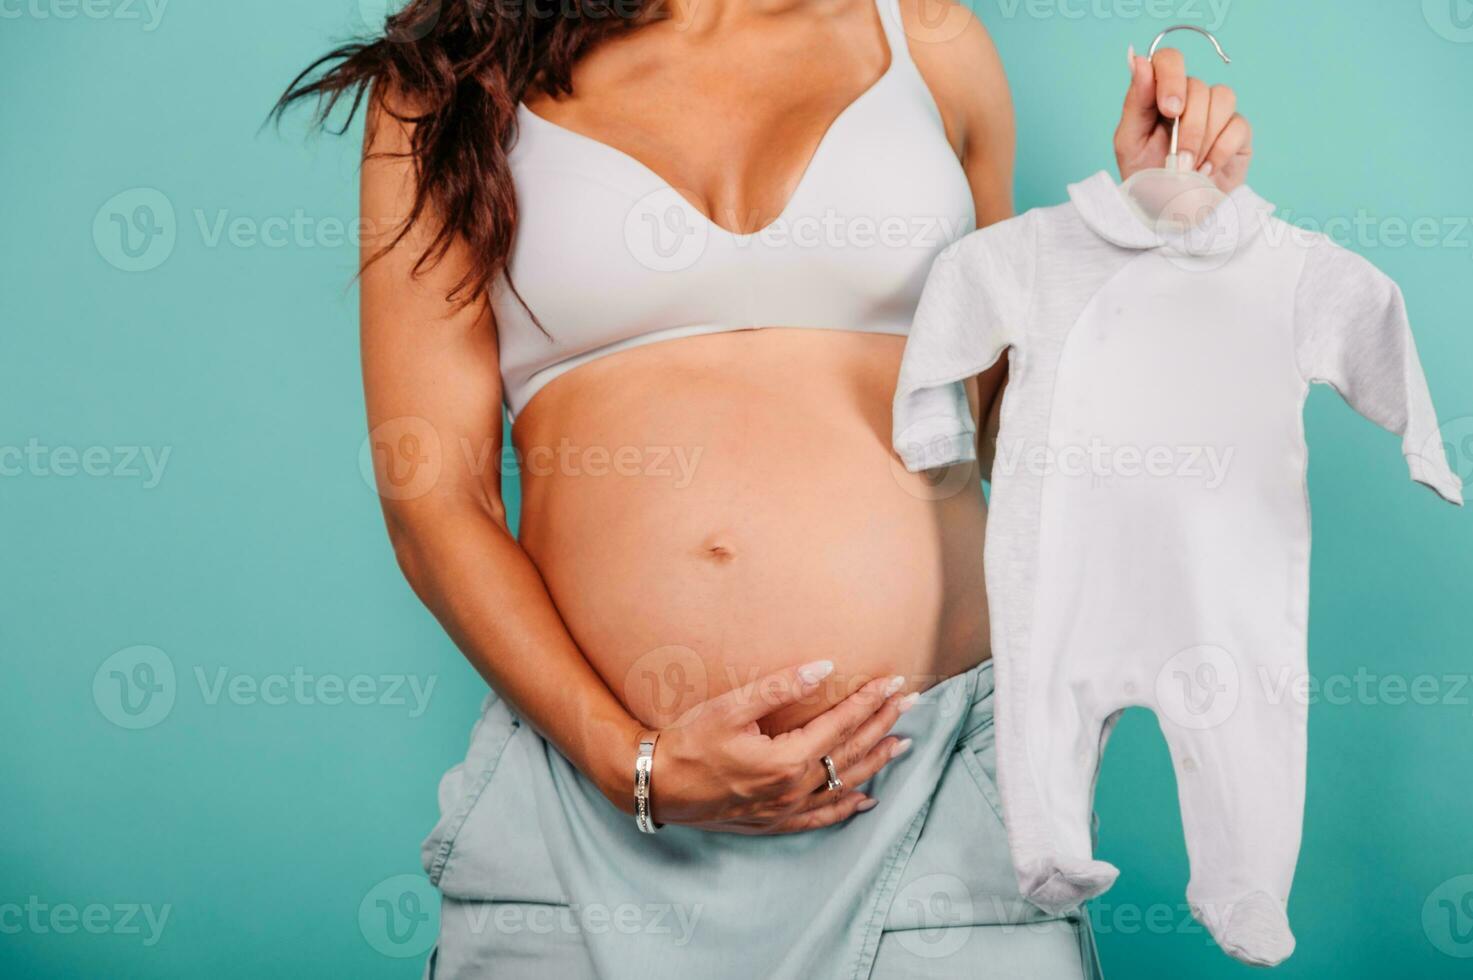 Pregnant mom prepares the clothes for the baby photo